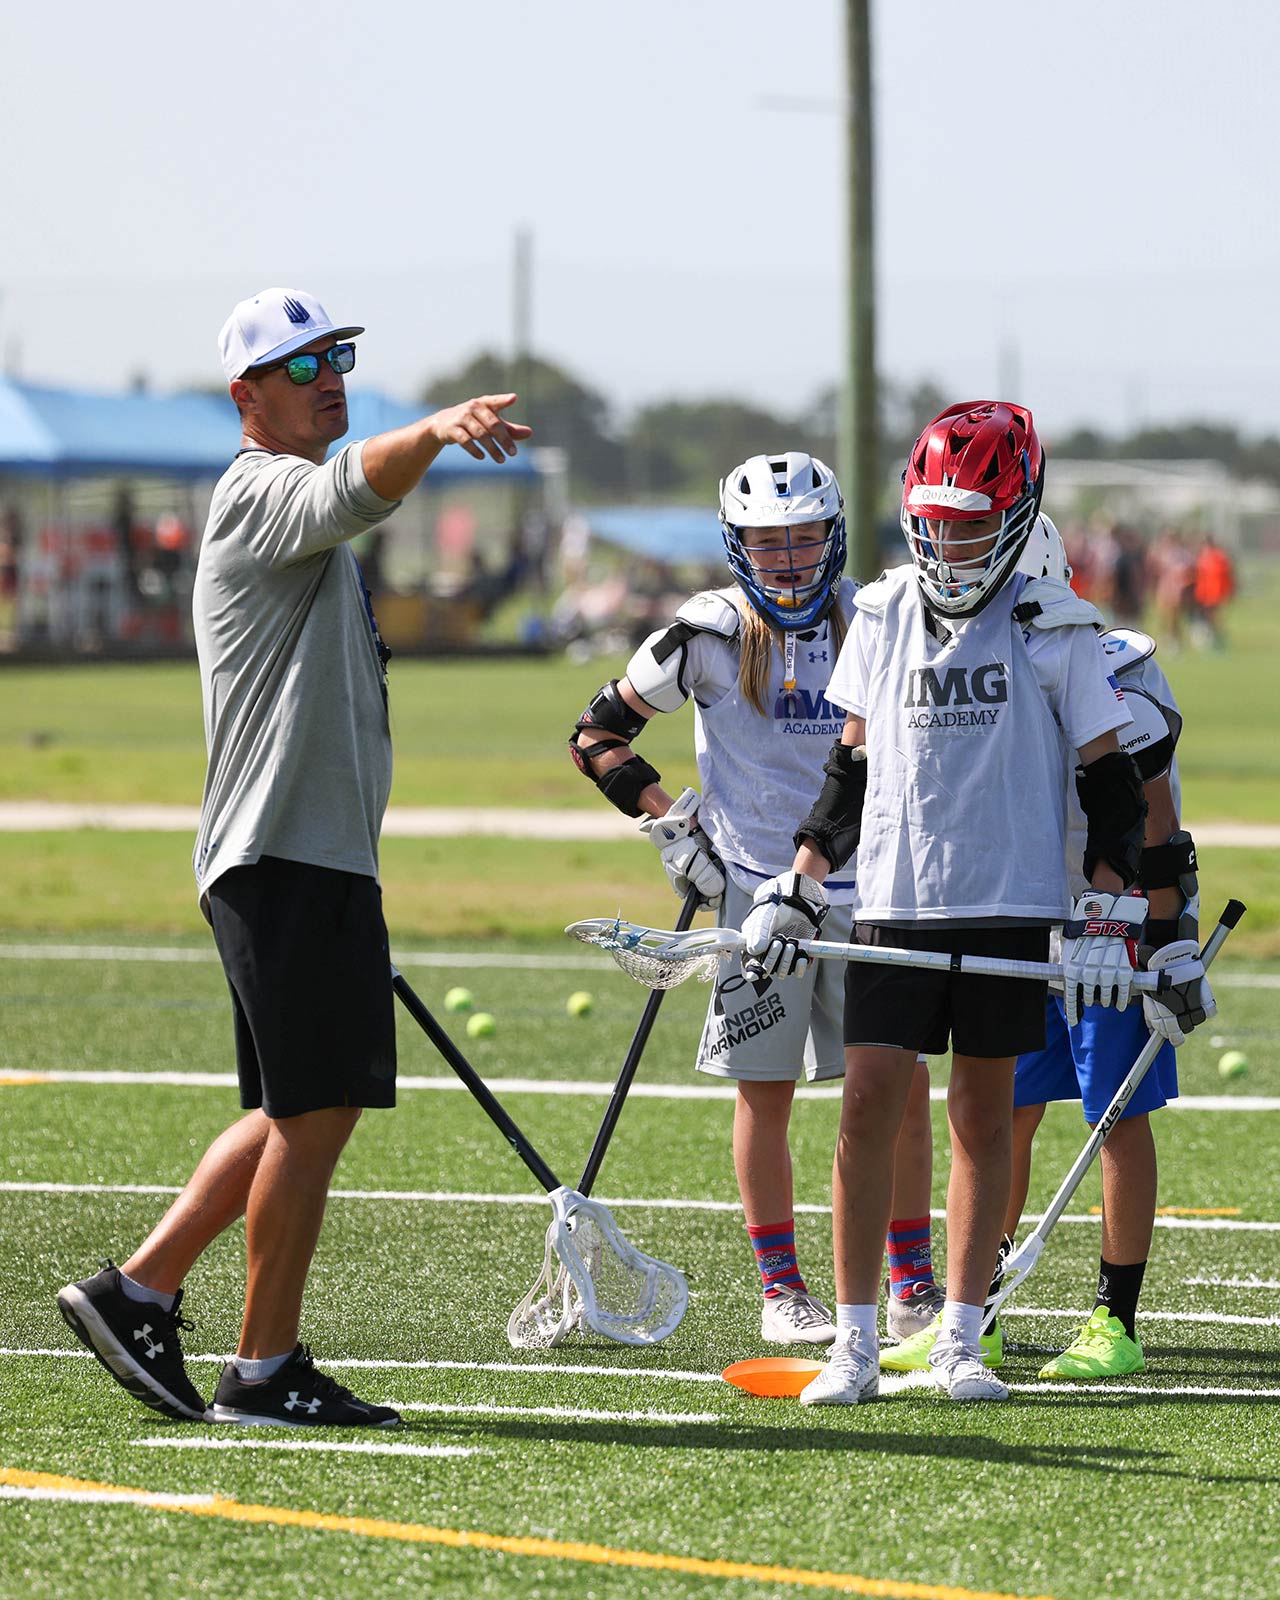 Lacrosse Camps Boys Lacrosse Camp IMG Academy